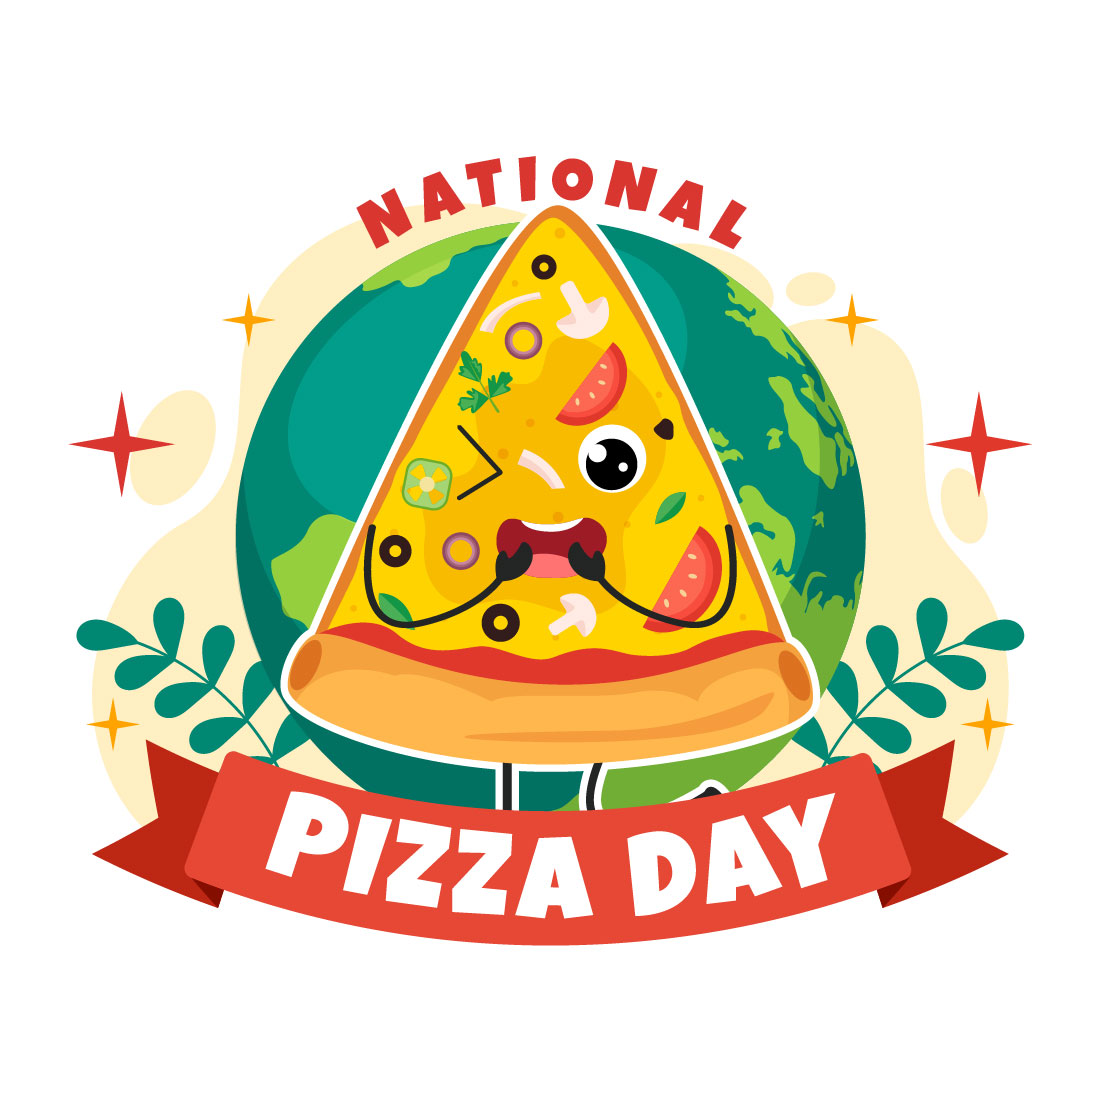 14 National Pizza Day Vector Illustration preview image.